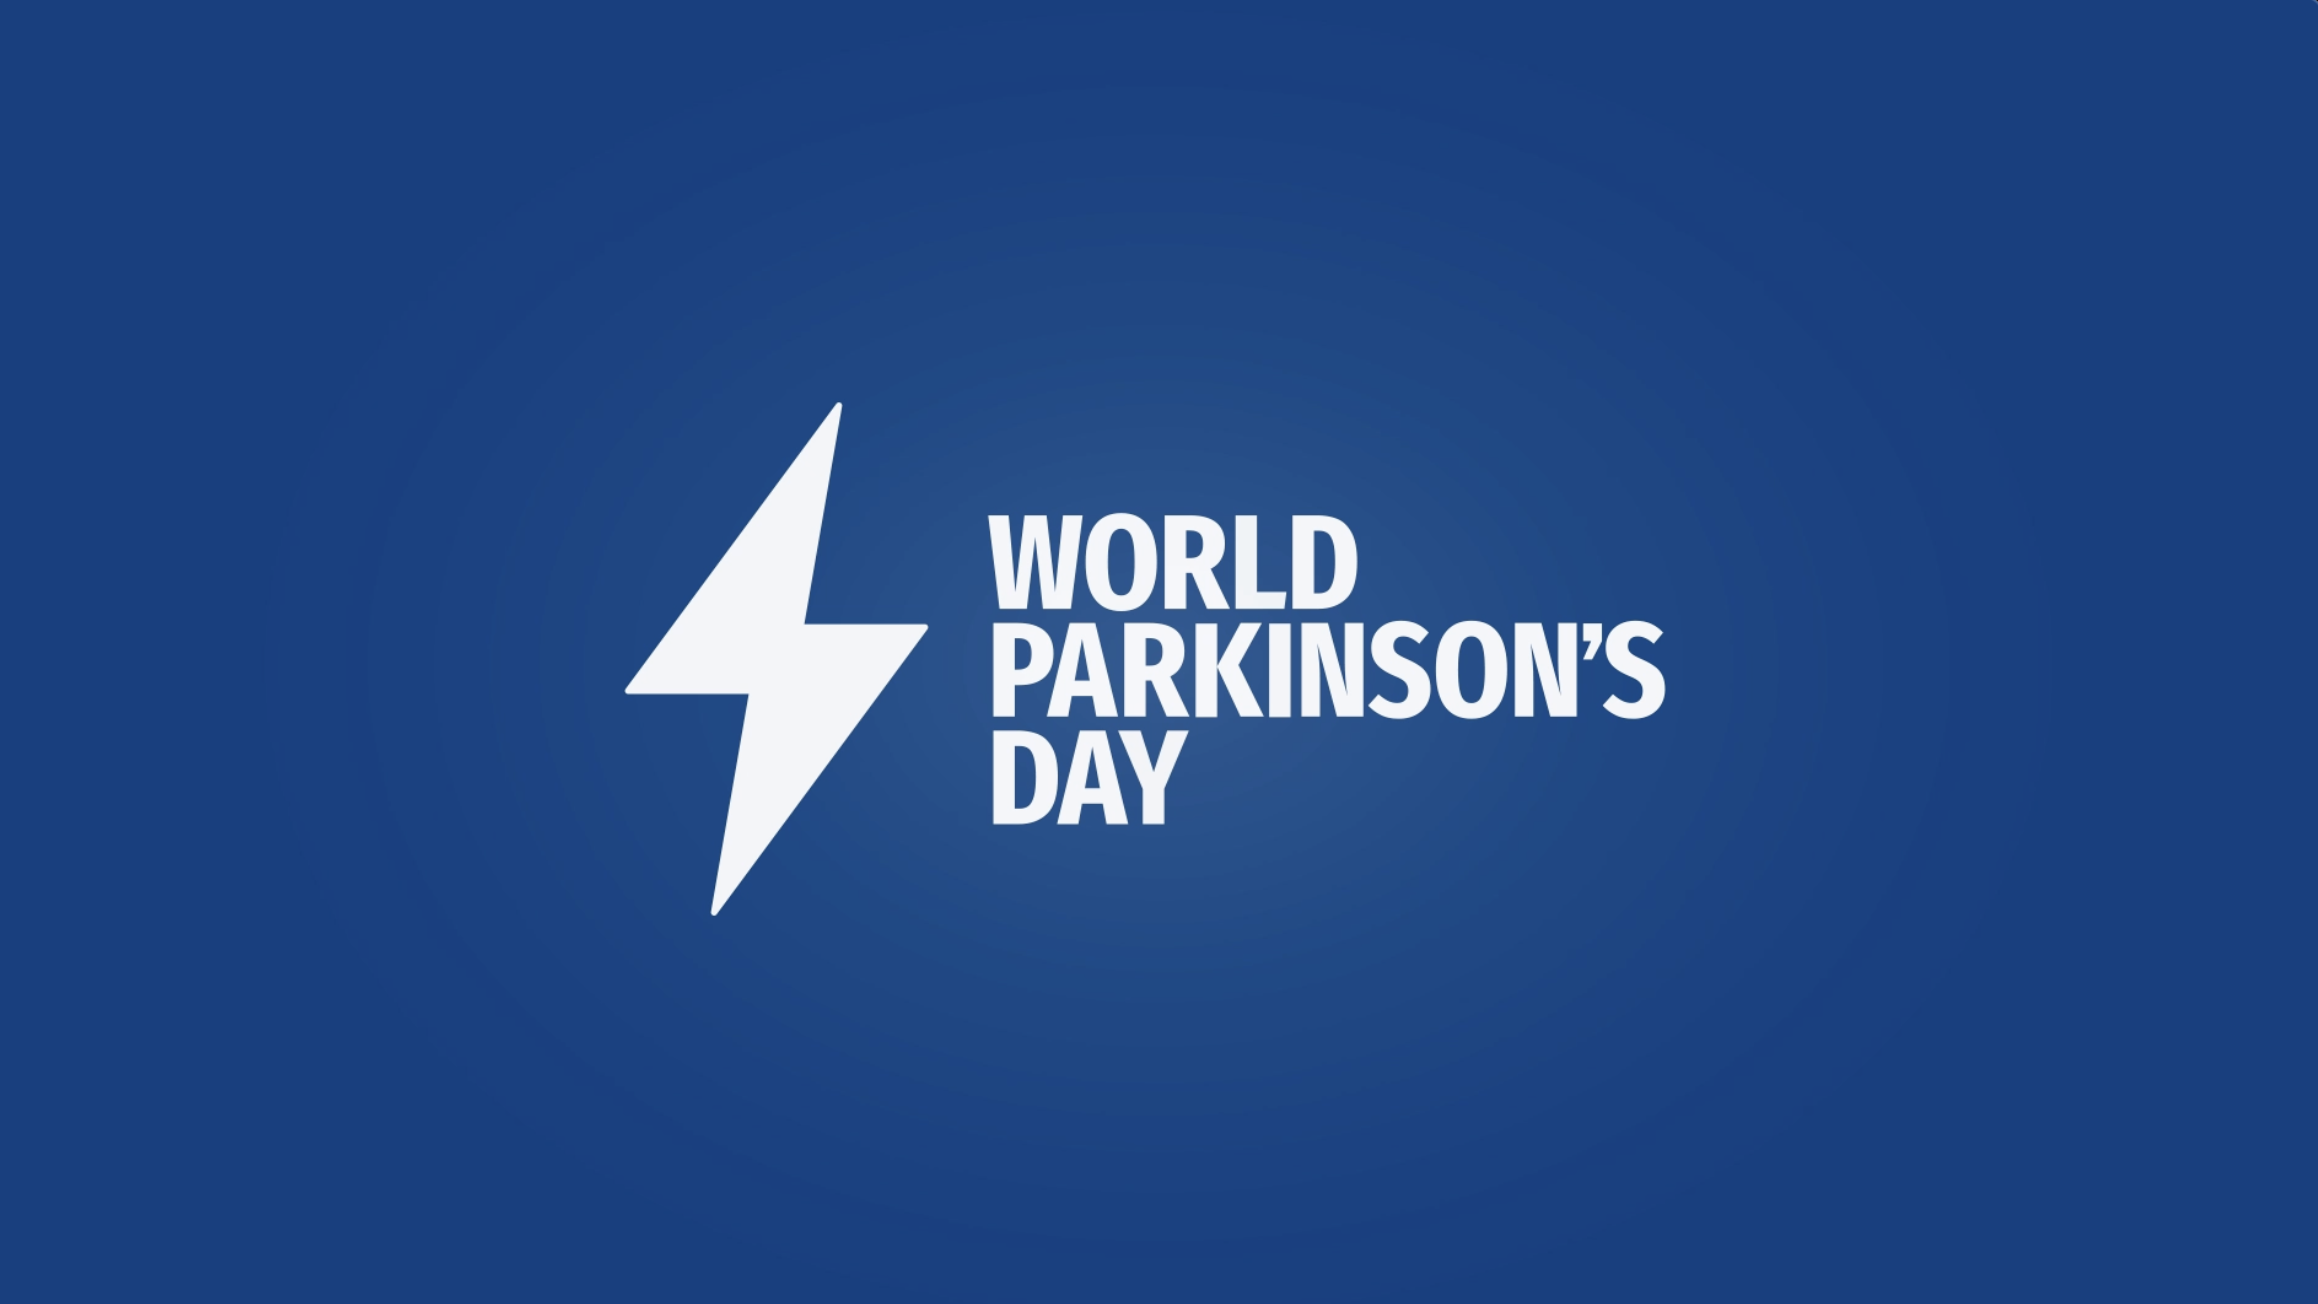 Awareness video coverage for Parkinson's